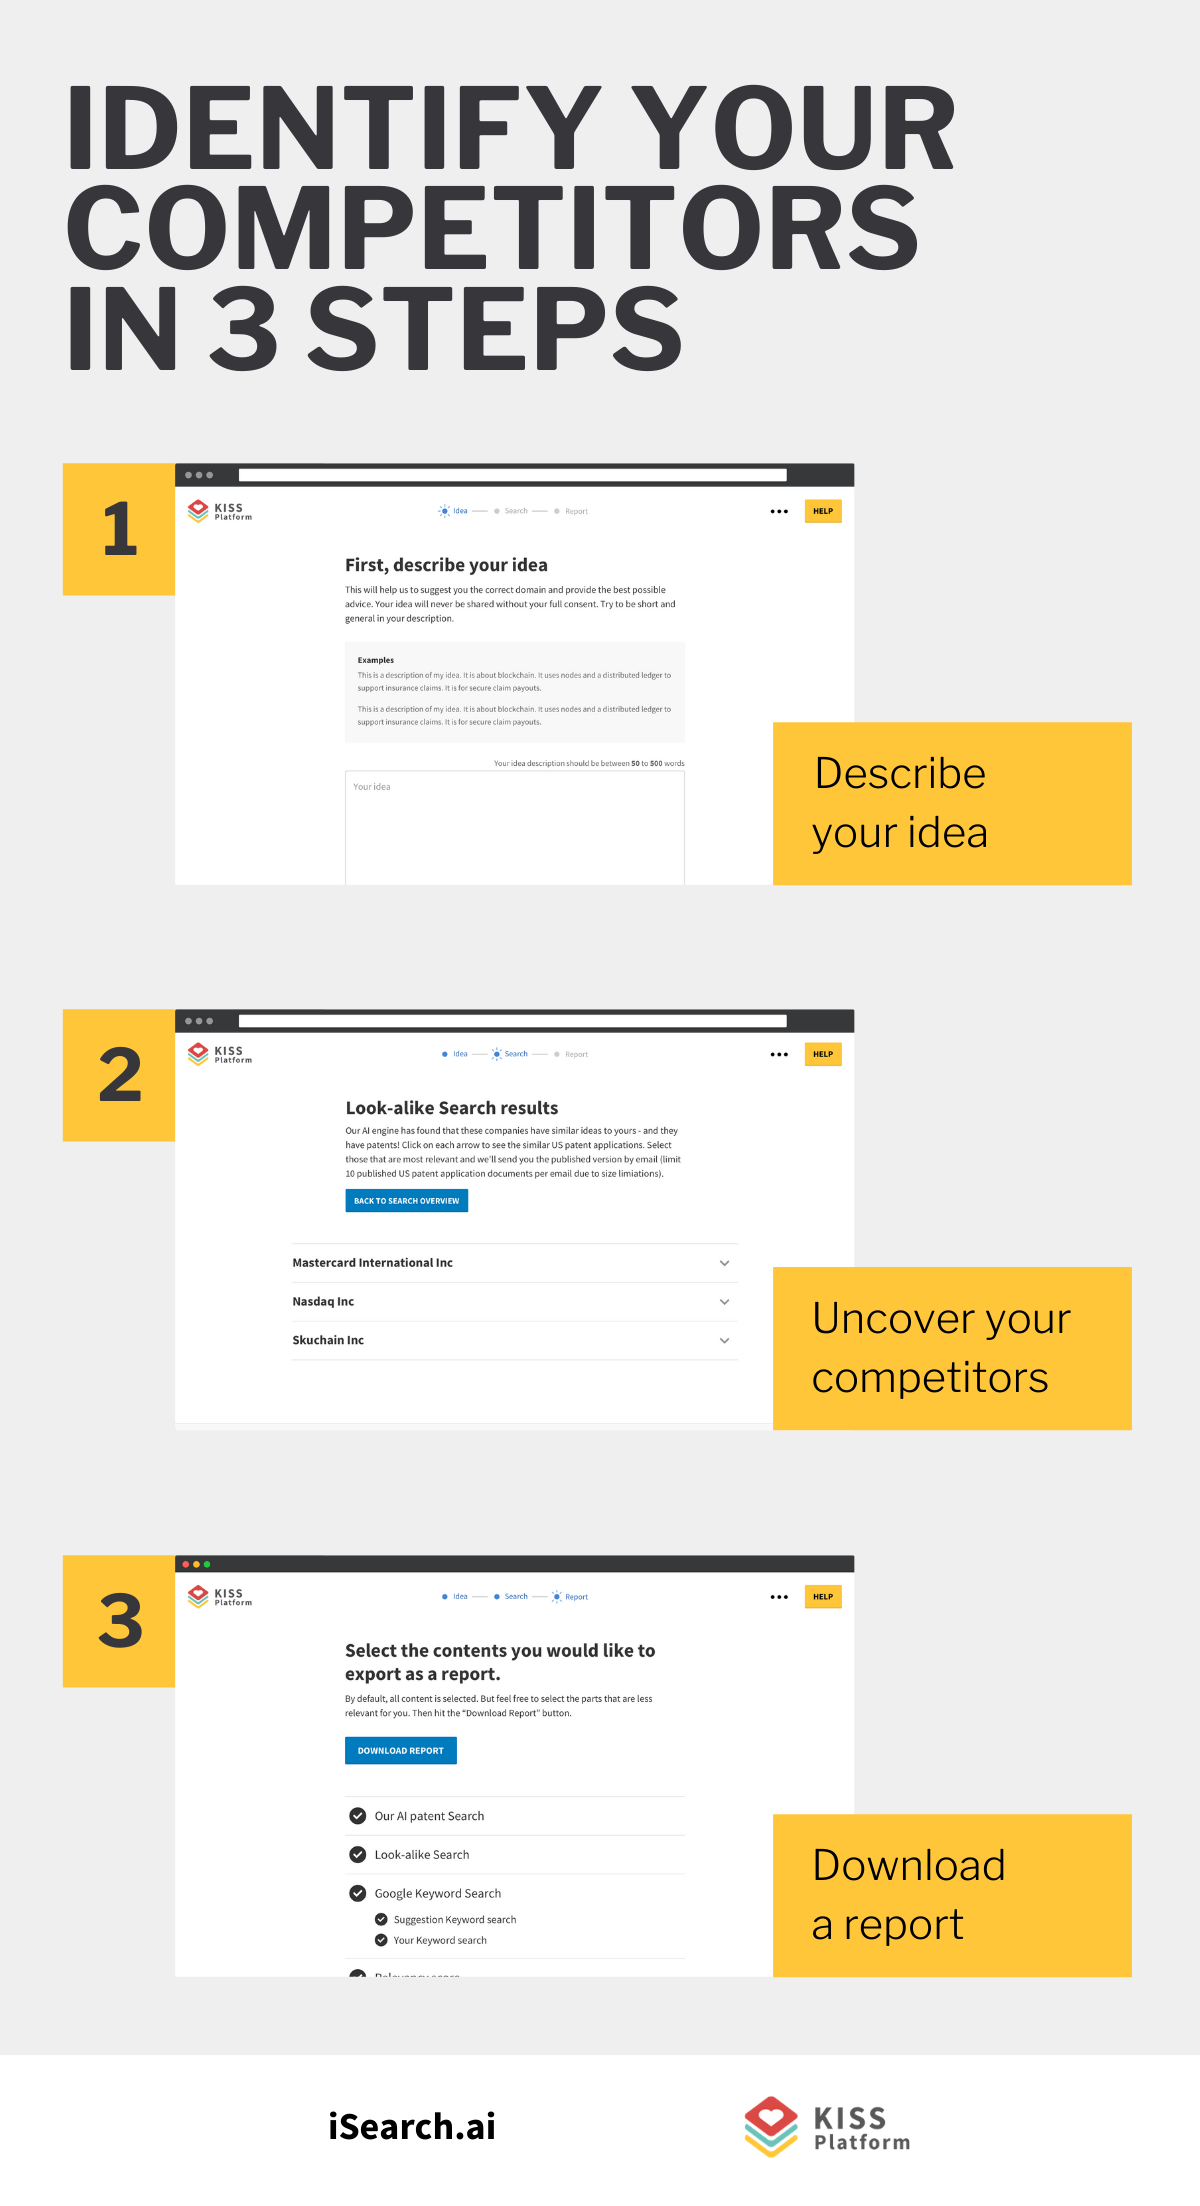 Identify your competition in 3 steps!